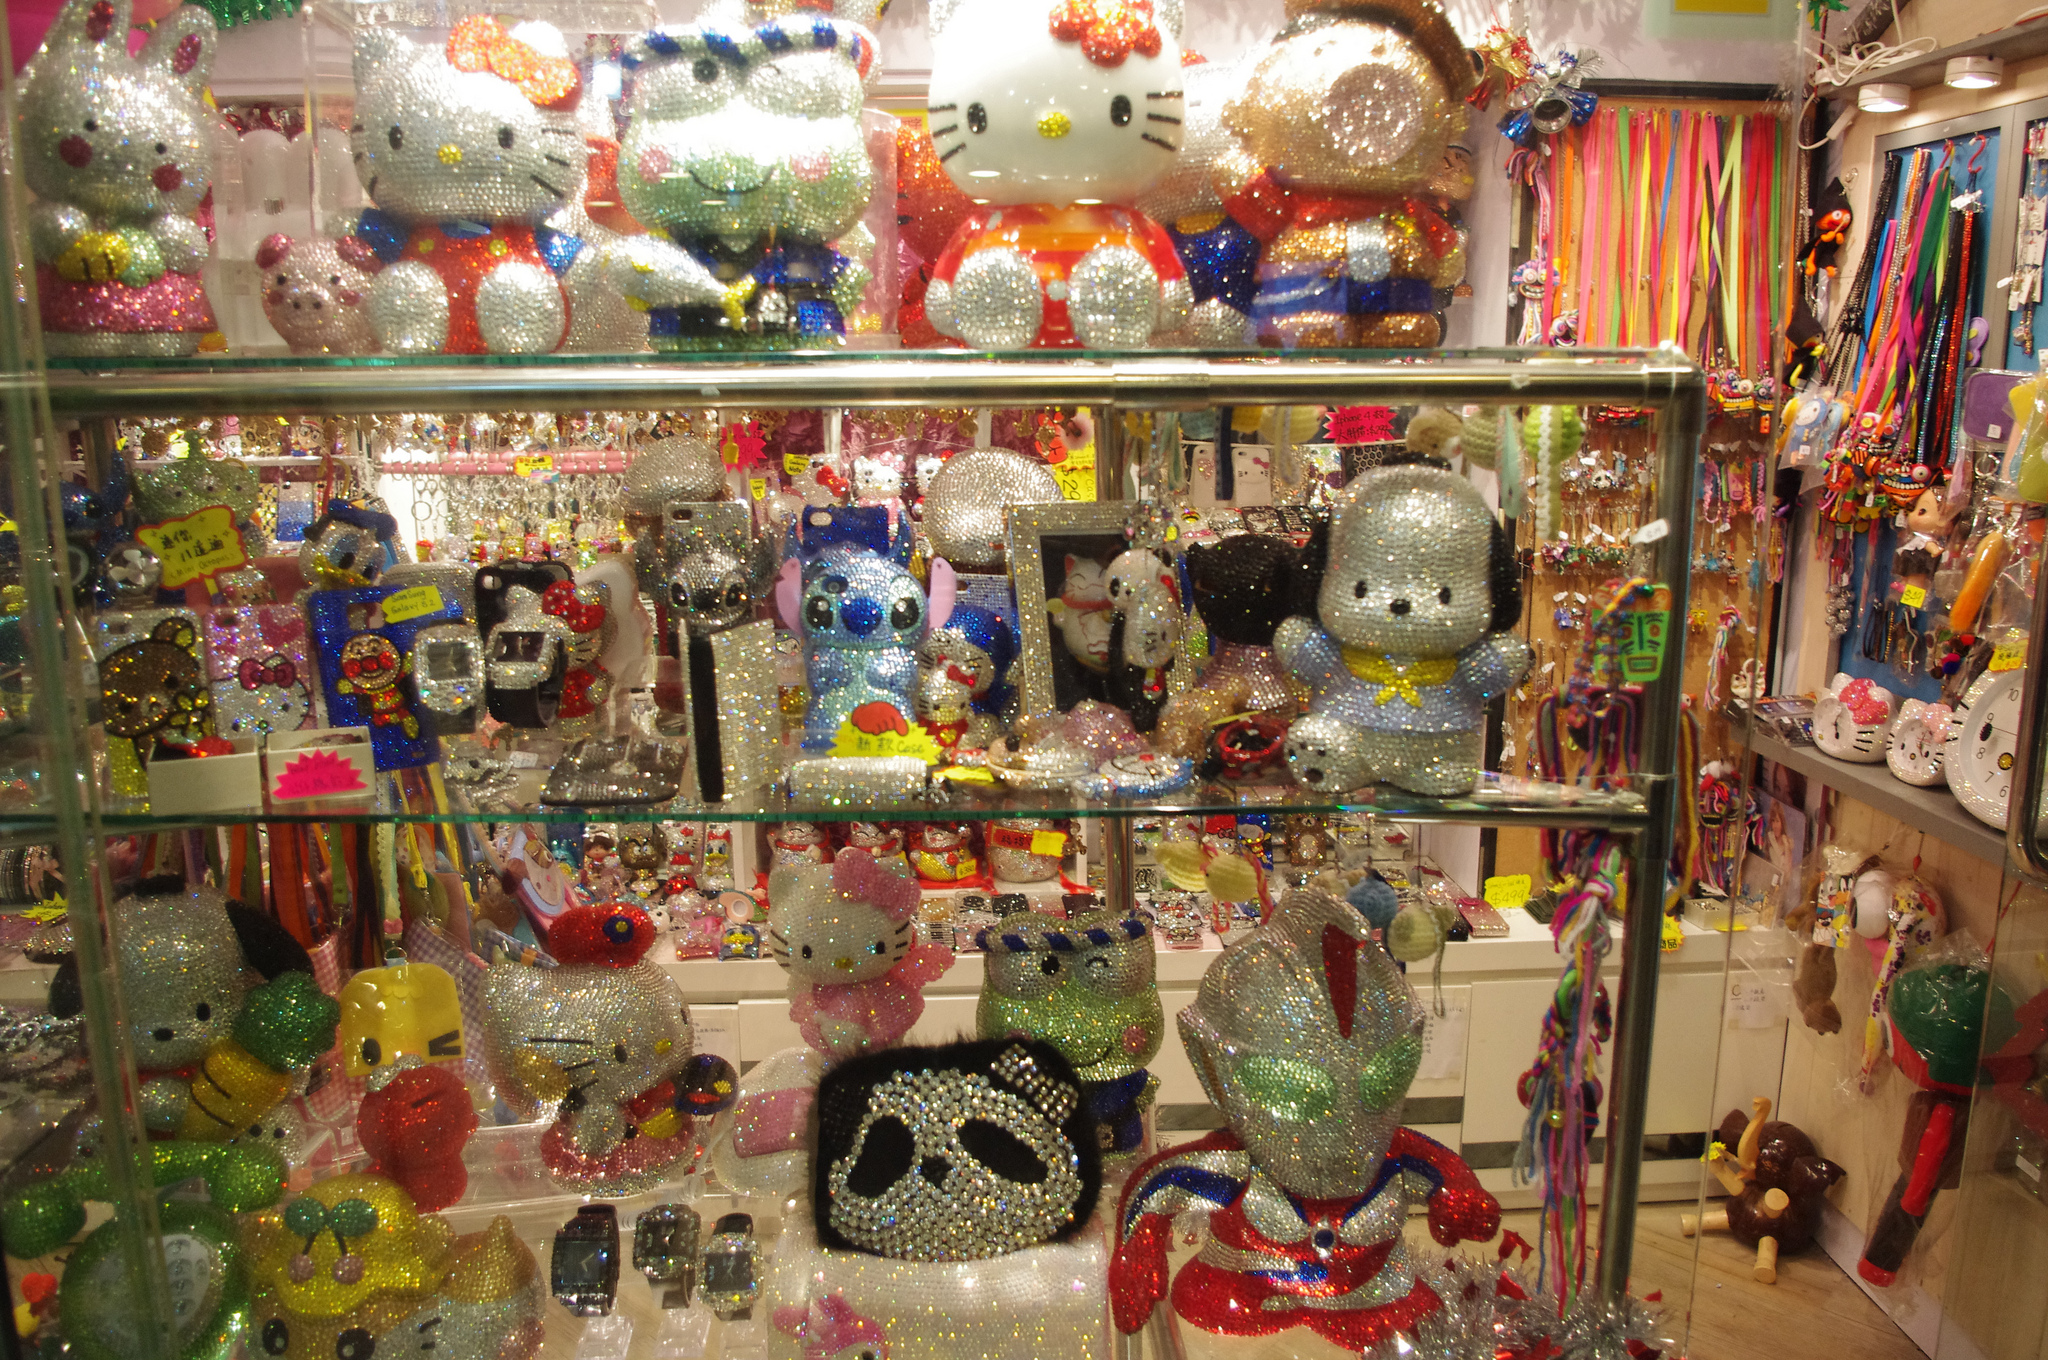 Character toys at the Trendy Zone in Hong Kong. Photo by alphacityguides.